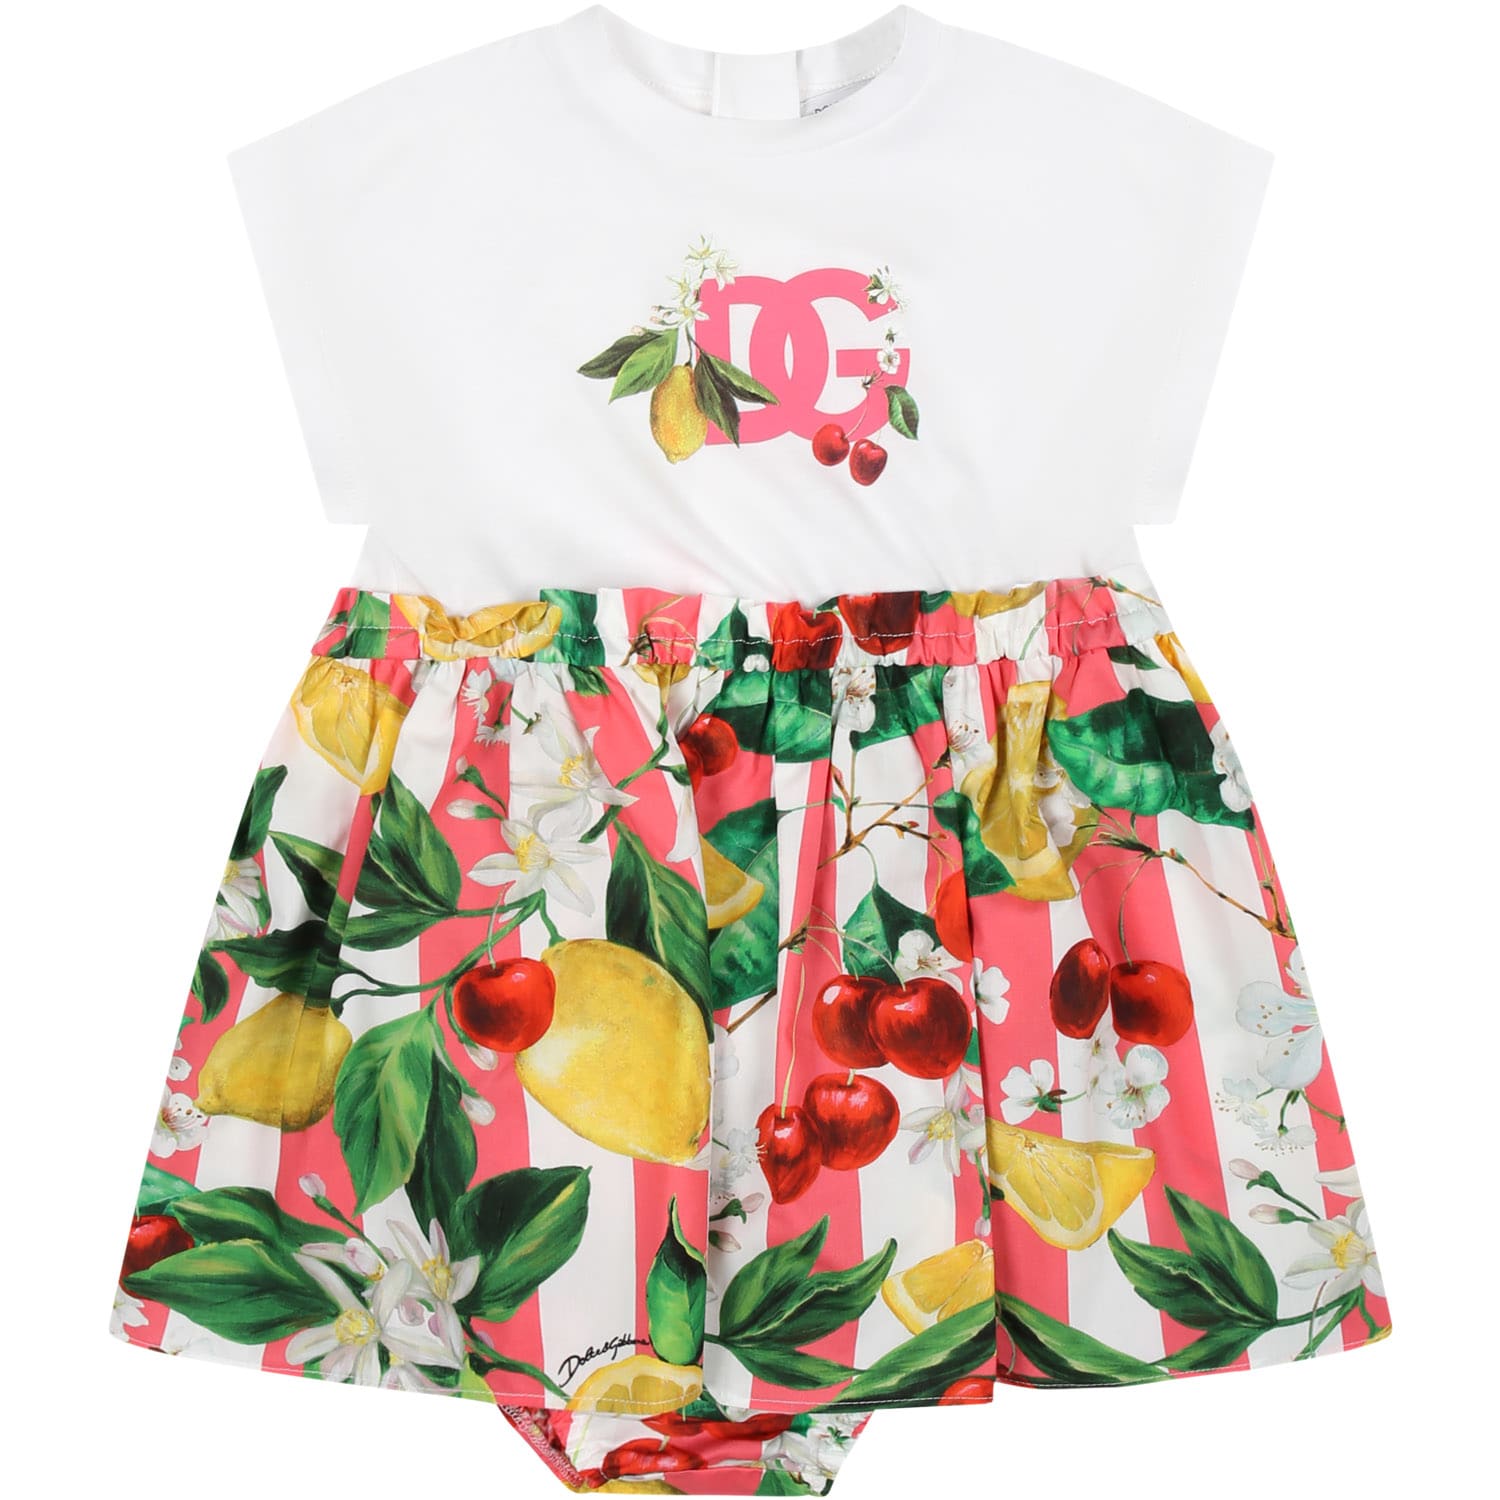 Dolce & Gabbana White Dress For Baby Girl With All-over Multicolor Fruits And Flowers